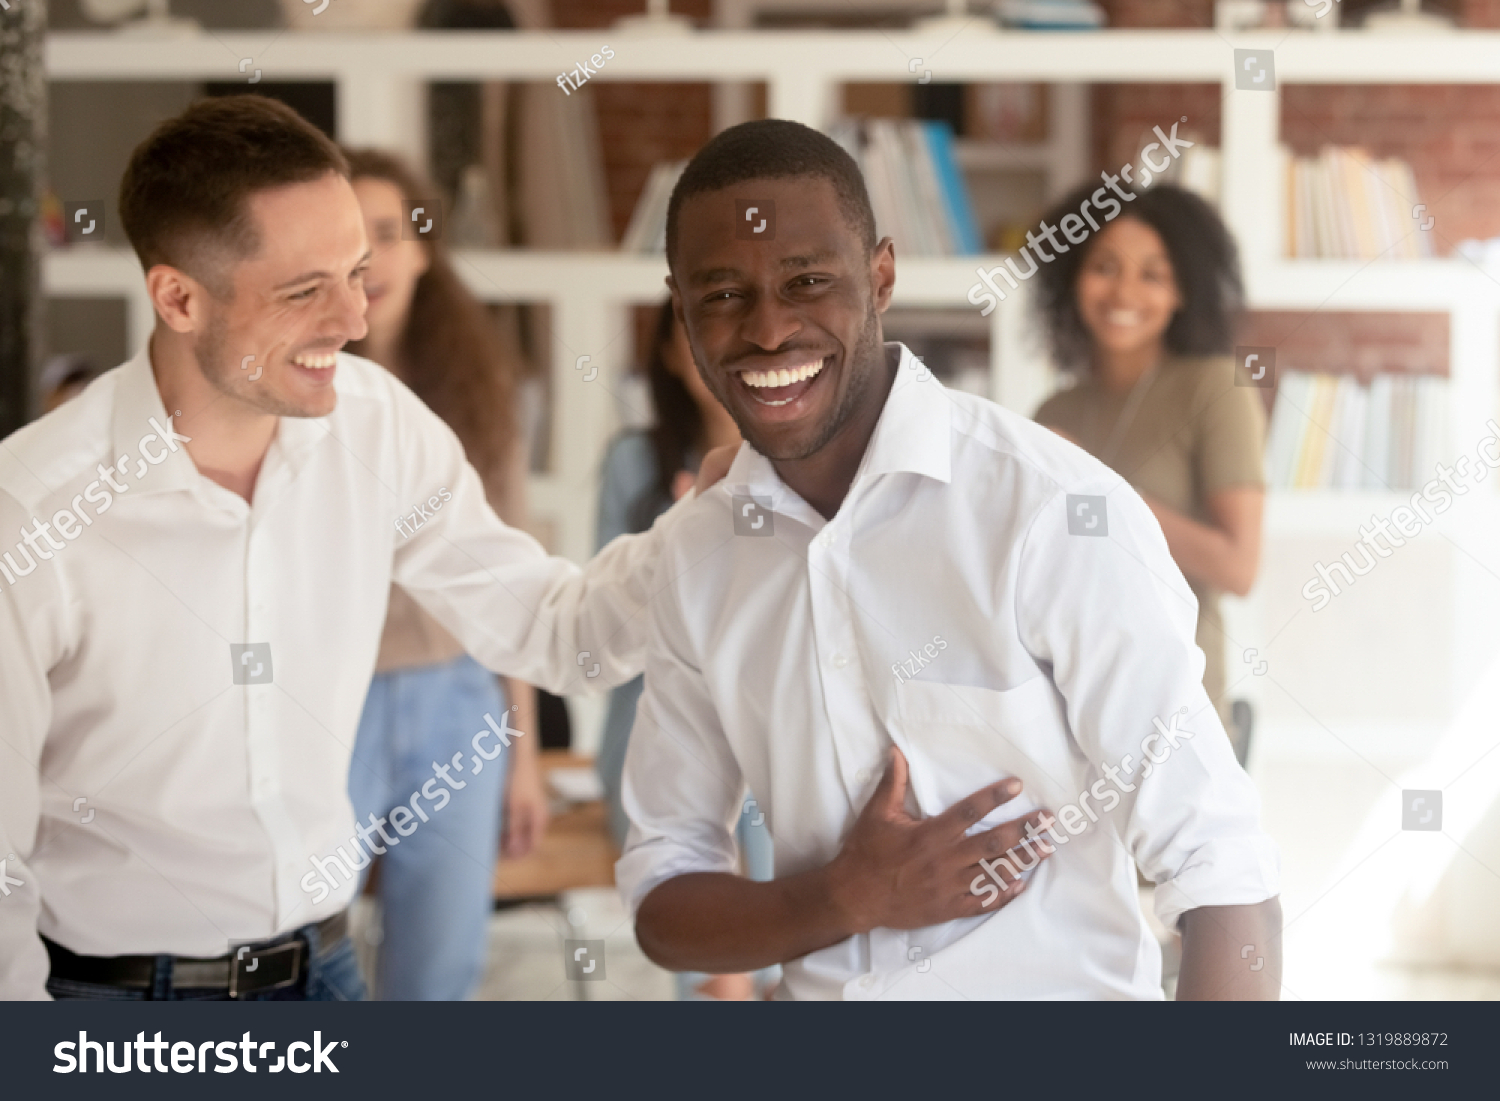 Successful proud black businessman looking at camera celebrating victory got promotion or reward, happy african employee taking congratulations from colleague on professional achievement in office #1319889872